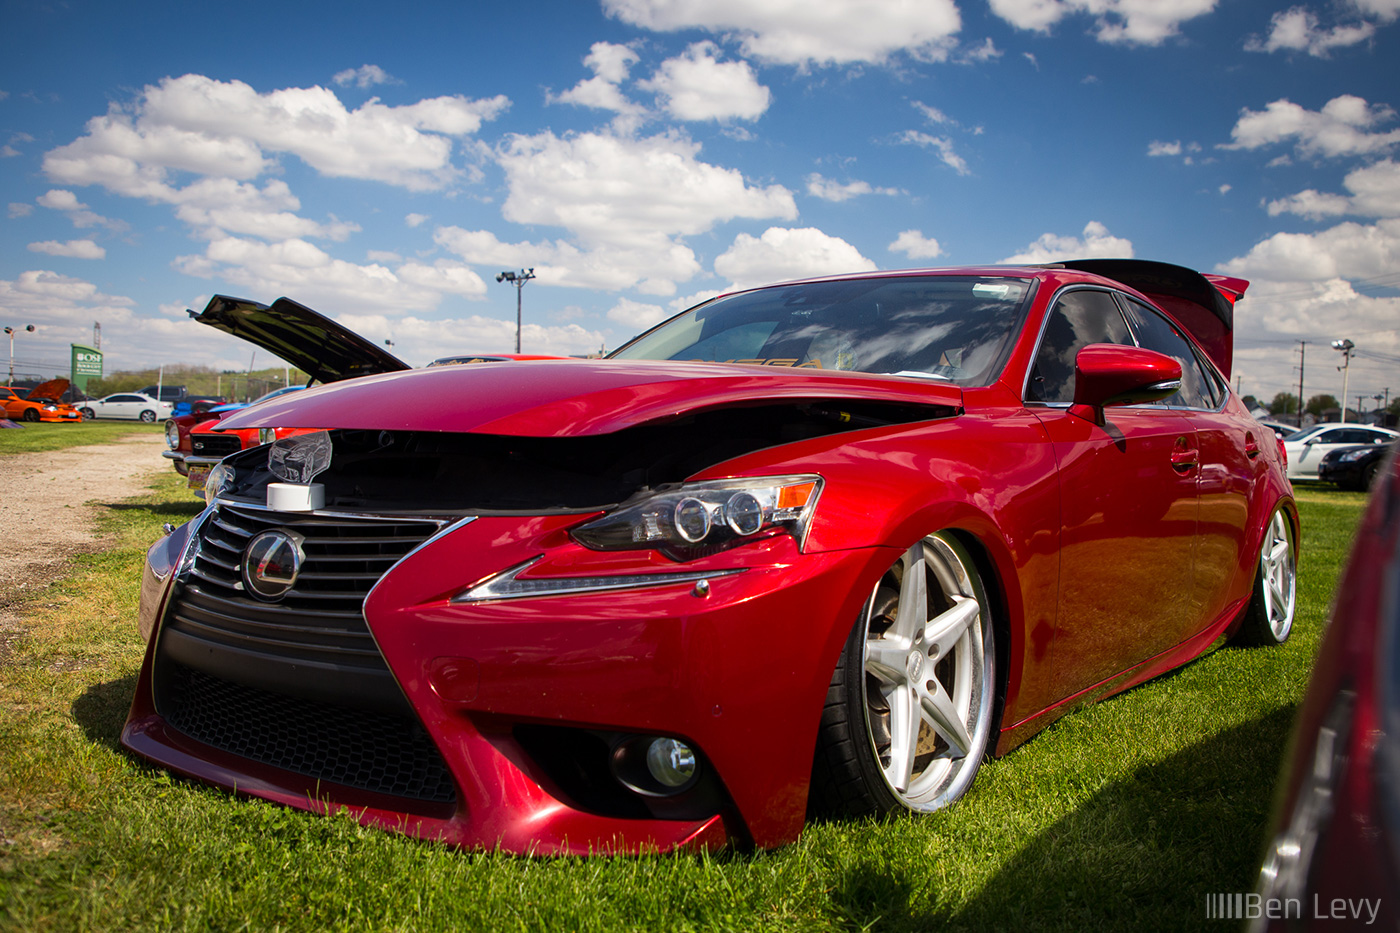 Bagged Lexus IS 250 at IFO in Rockford